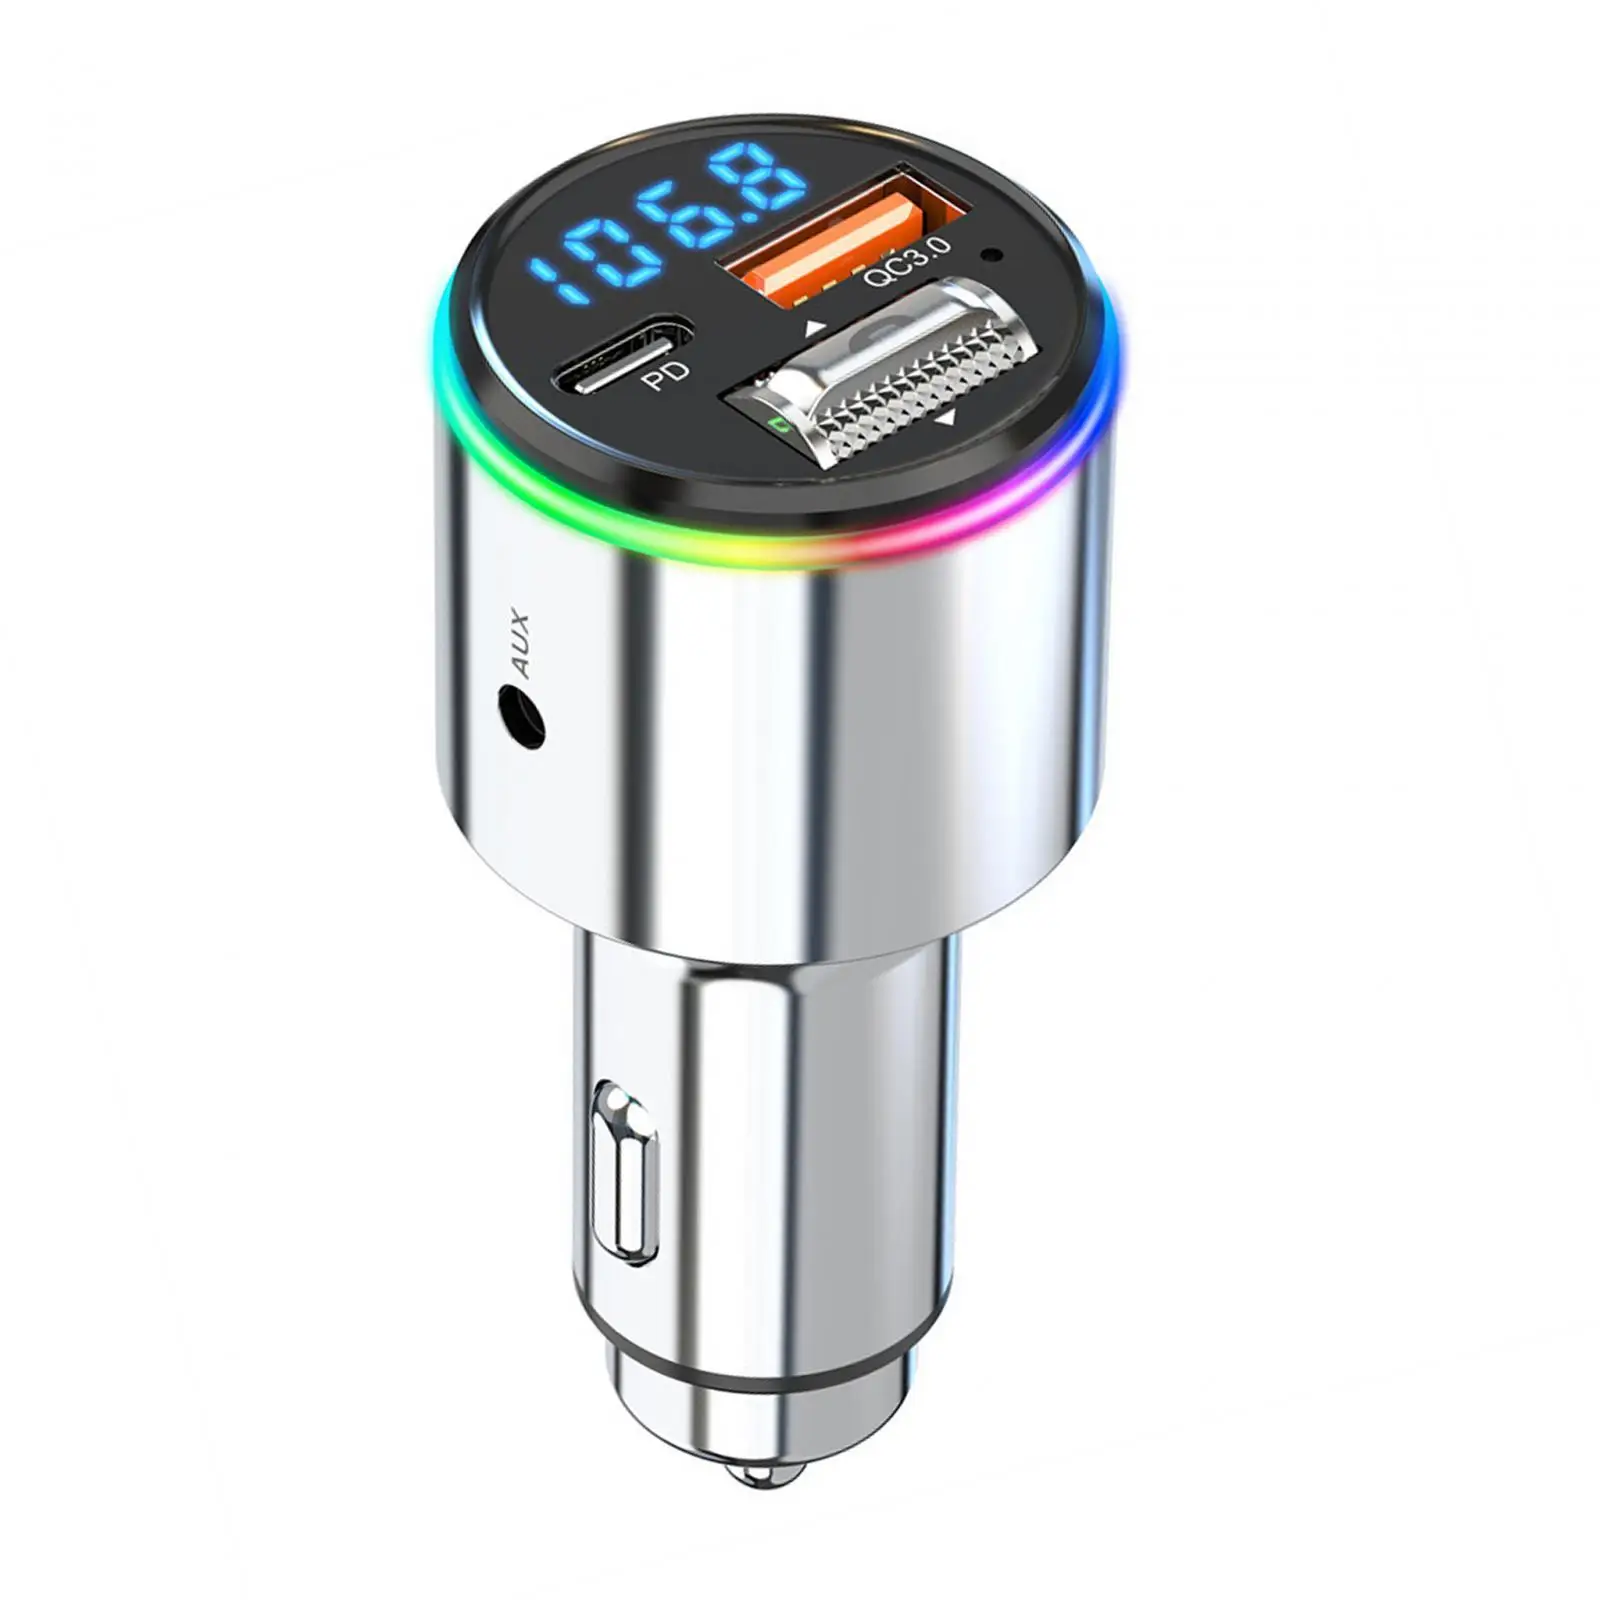 V5.3 FM Transmitter for Car BC1.2 Afc Bass Boost Hands Free Calling with RGB Color Bluetooth Car Adapter for SUV Car Truck